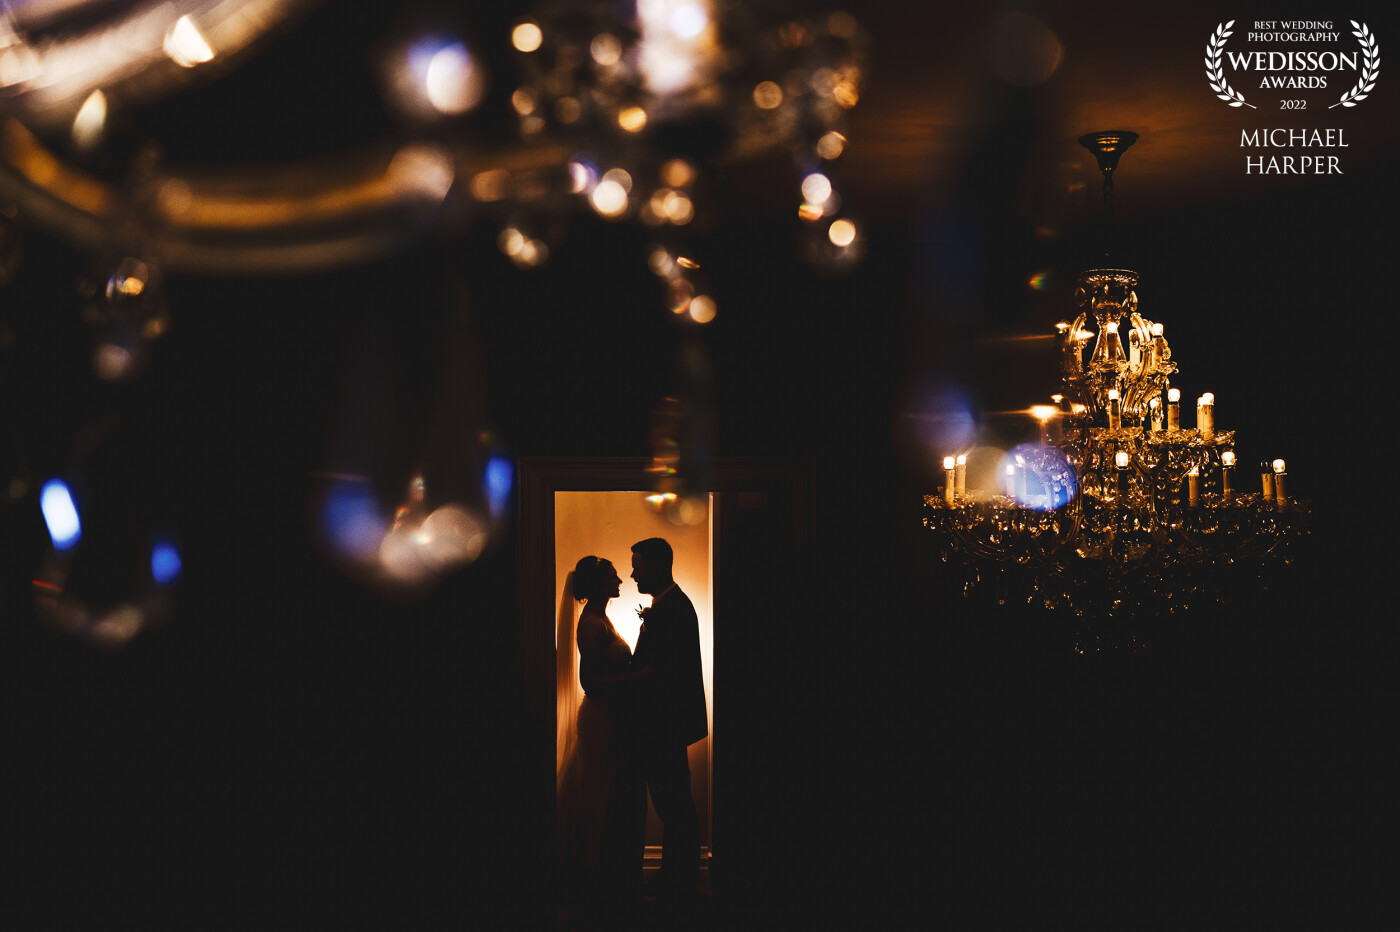 When the sun had set there was an opportunity to turn a corridor into a portrait. This was created by shooting through a chandelier whilst a flash behind the couple made a shiloutte. Please visit our Instagram for the behind the scenes video.